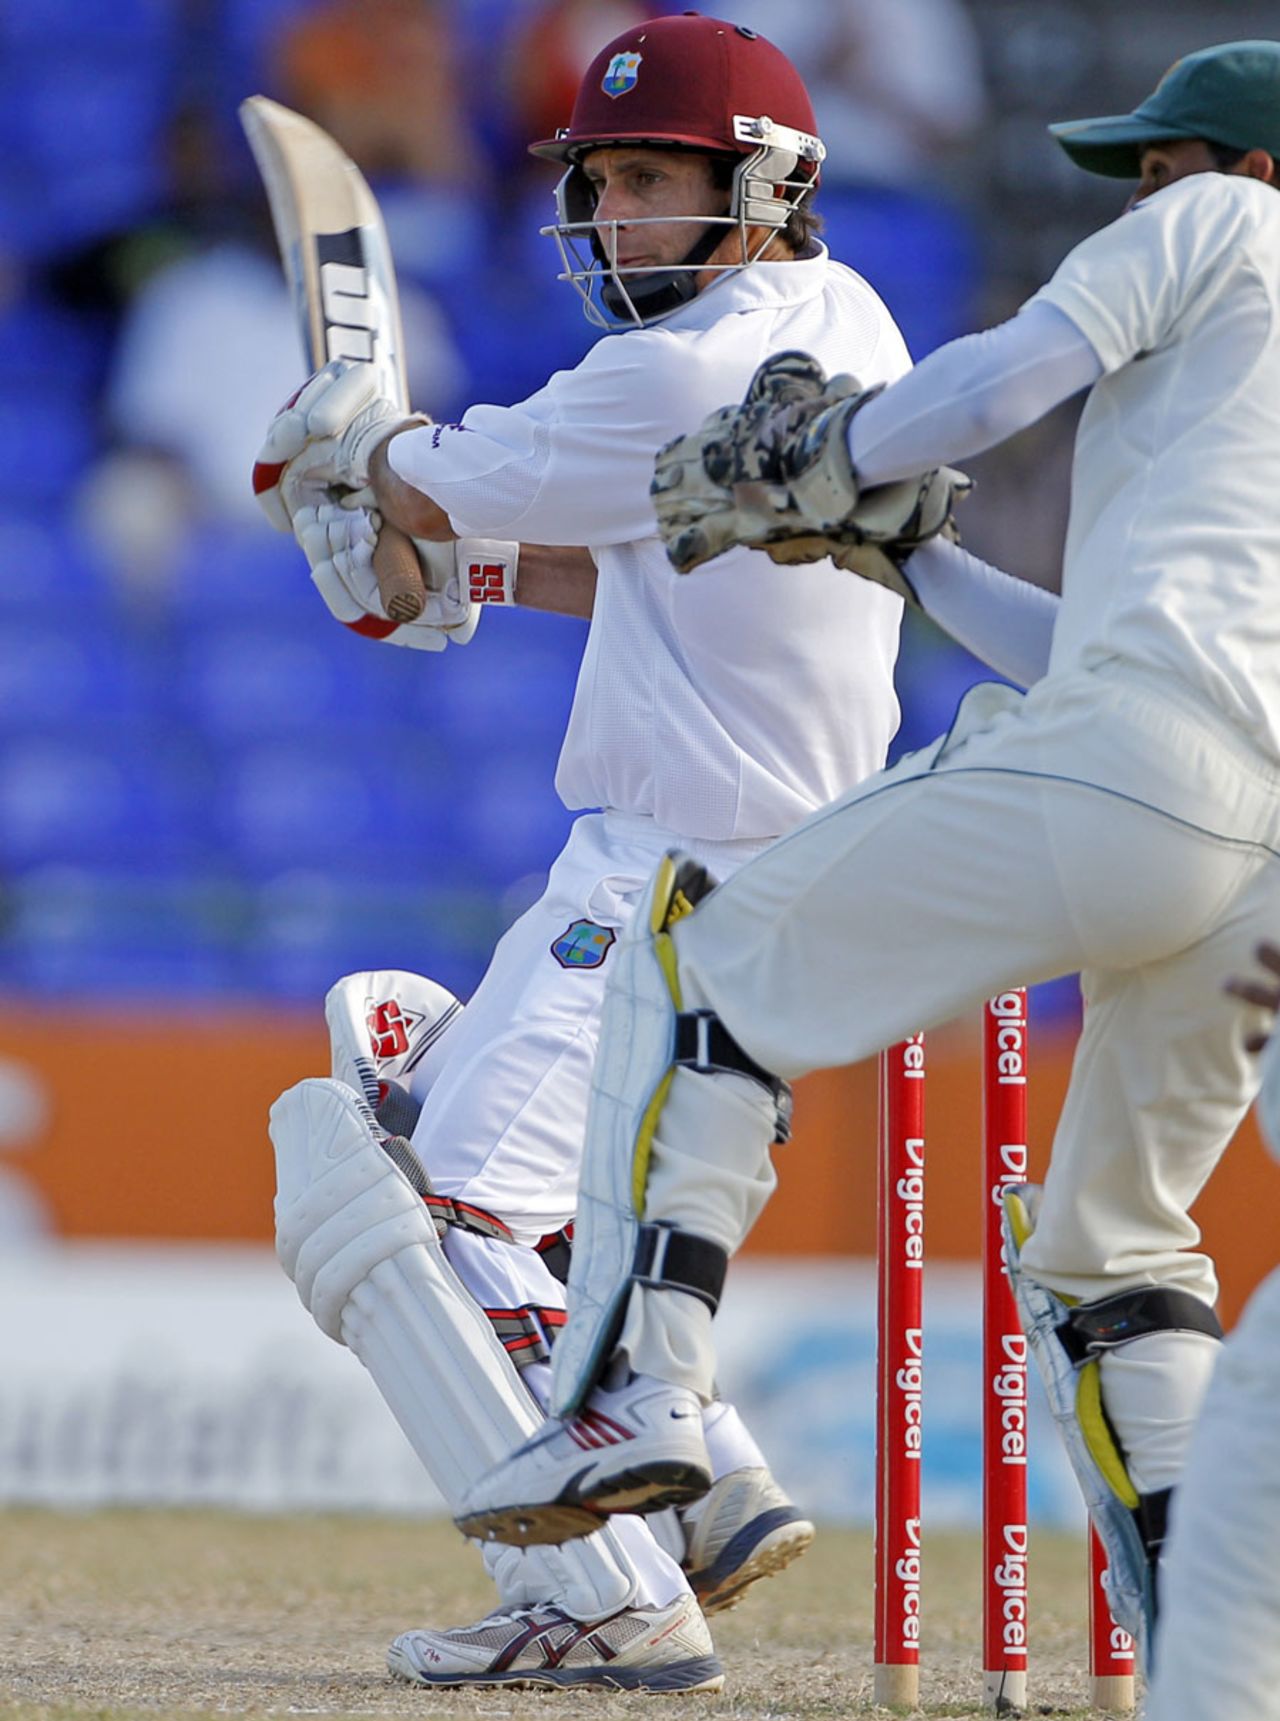 Brendan Nash cuts, West Indies v Pakistan, 2nd Test, St Kitts, 4th day, May 23, 2011